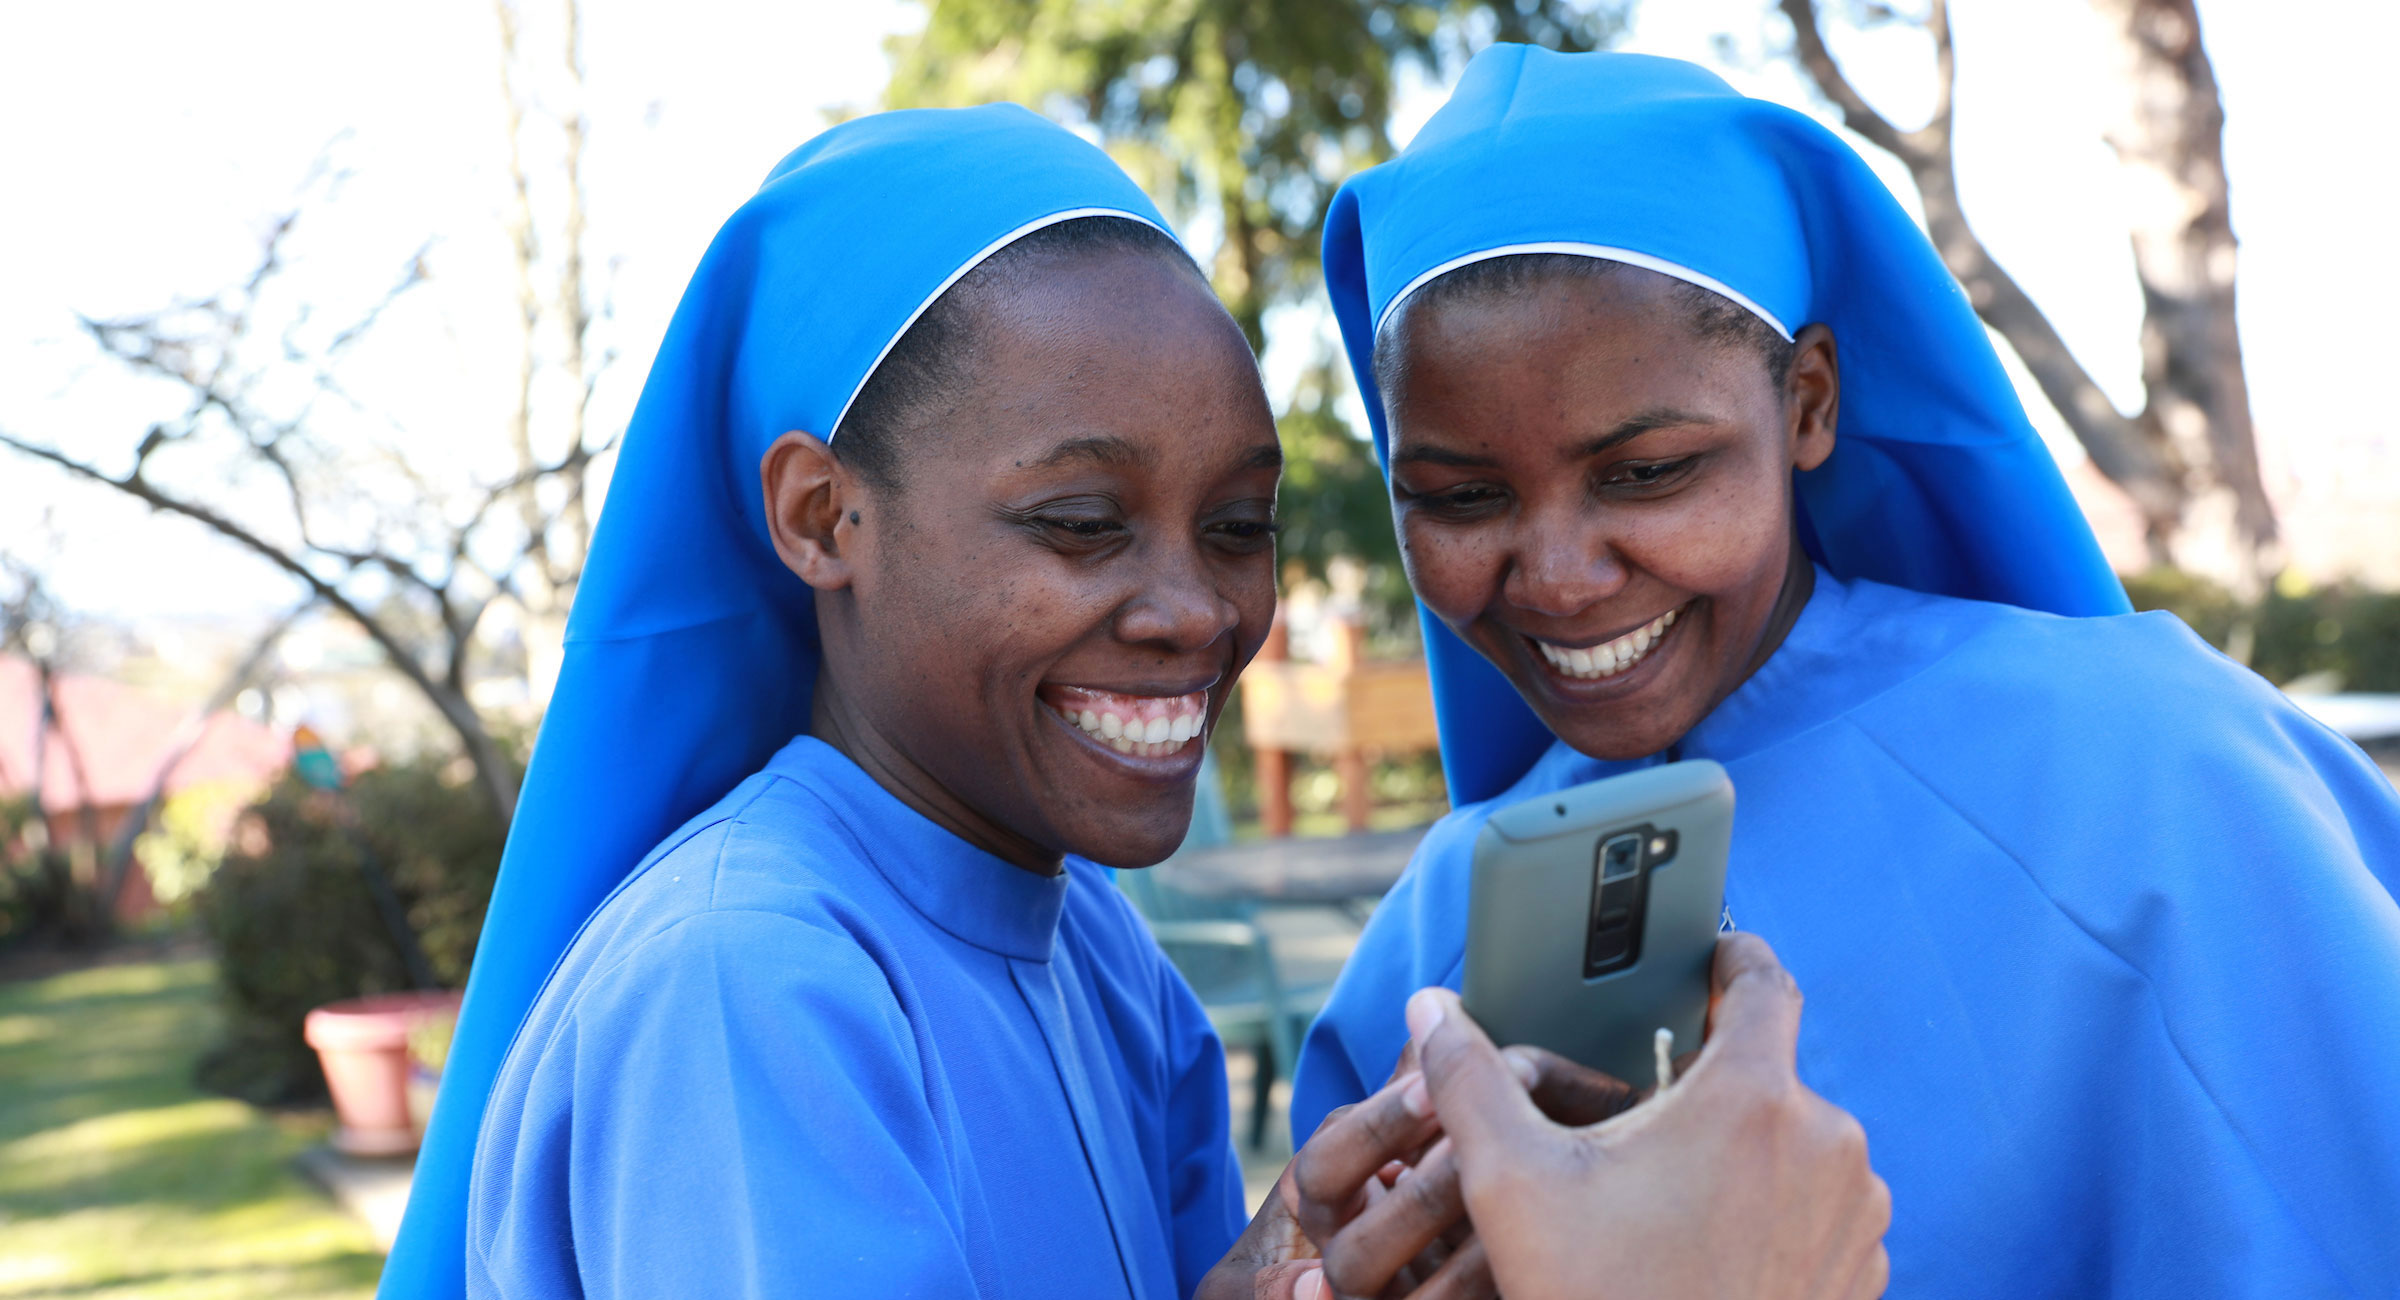 Sister Mary Namutebi, DM, '20, '22, left and Sister Paskazia Ampronia Nakitende, DM, '19 with The Daughters of Mary Sisters in Uganda share a moment together while reviewing a selfie photo they took on their cell phone in the garden at their St. Joseph's Residence in West Seattle. 